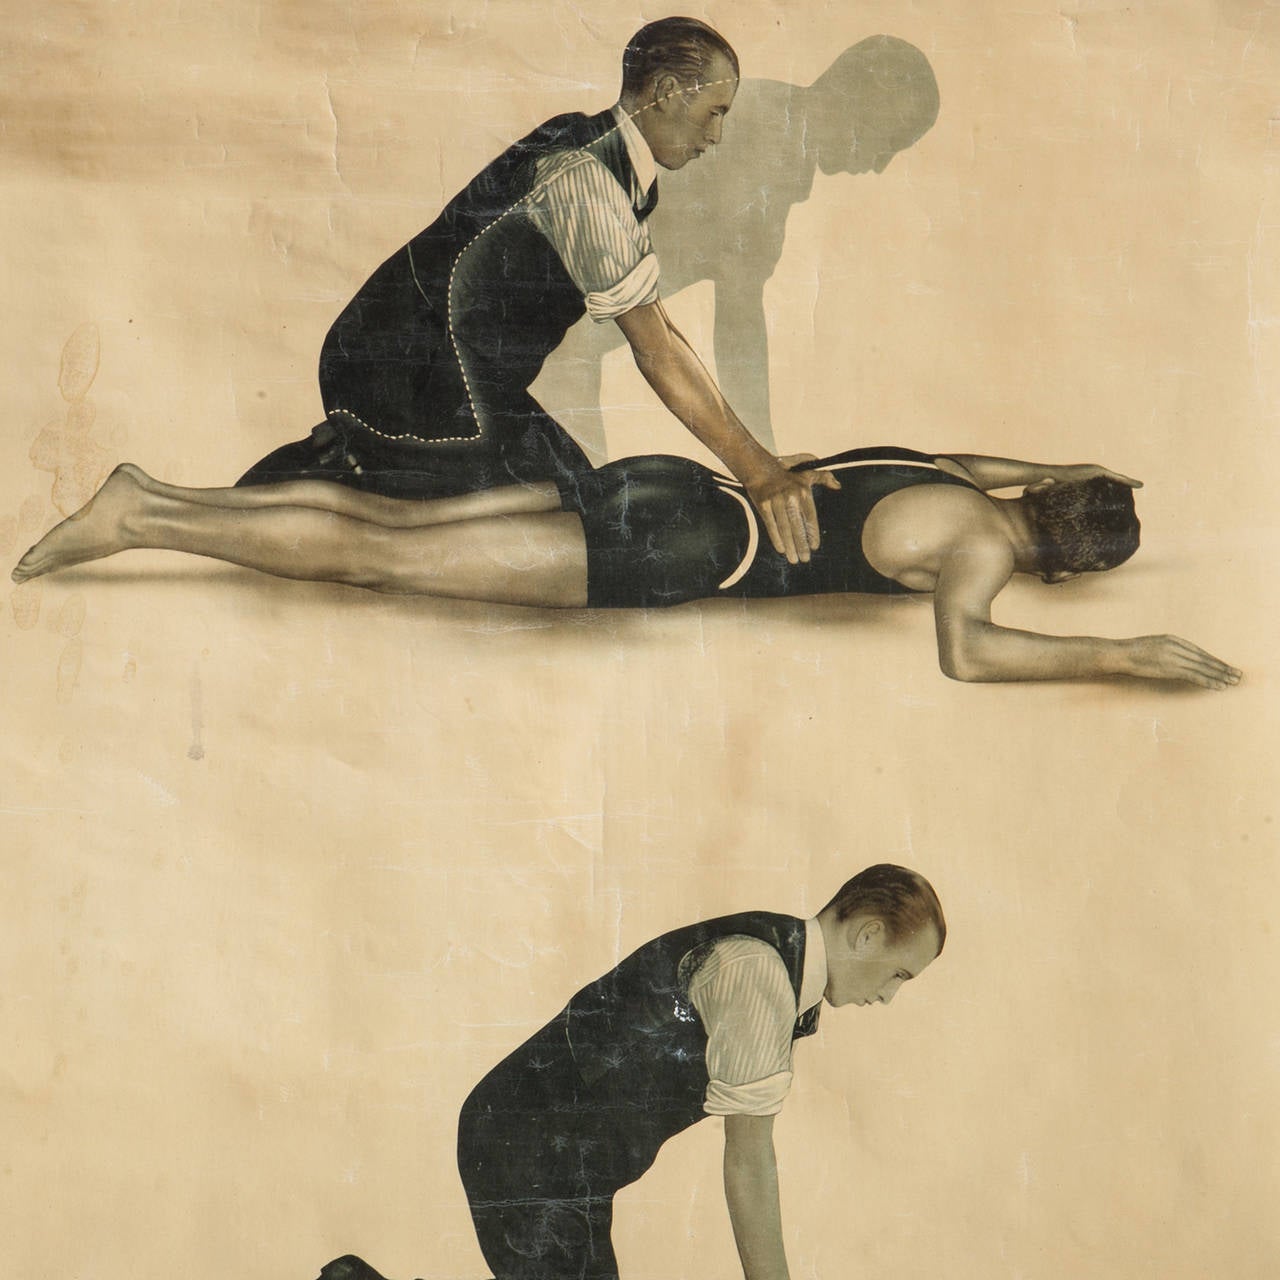 antique poster, created by The St. John Ambulance Association demonstrating a respiration maneuver. 

England circa 1920.